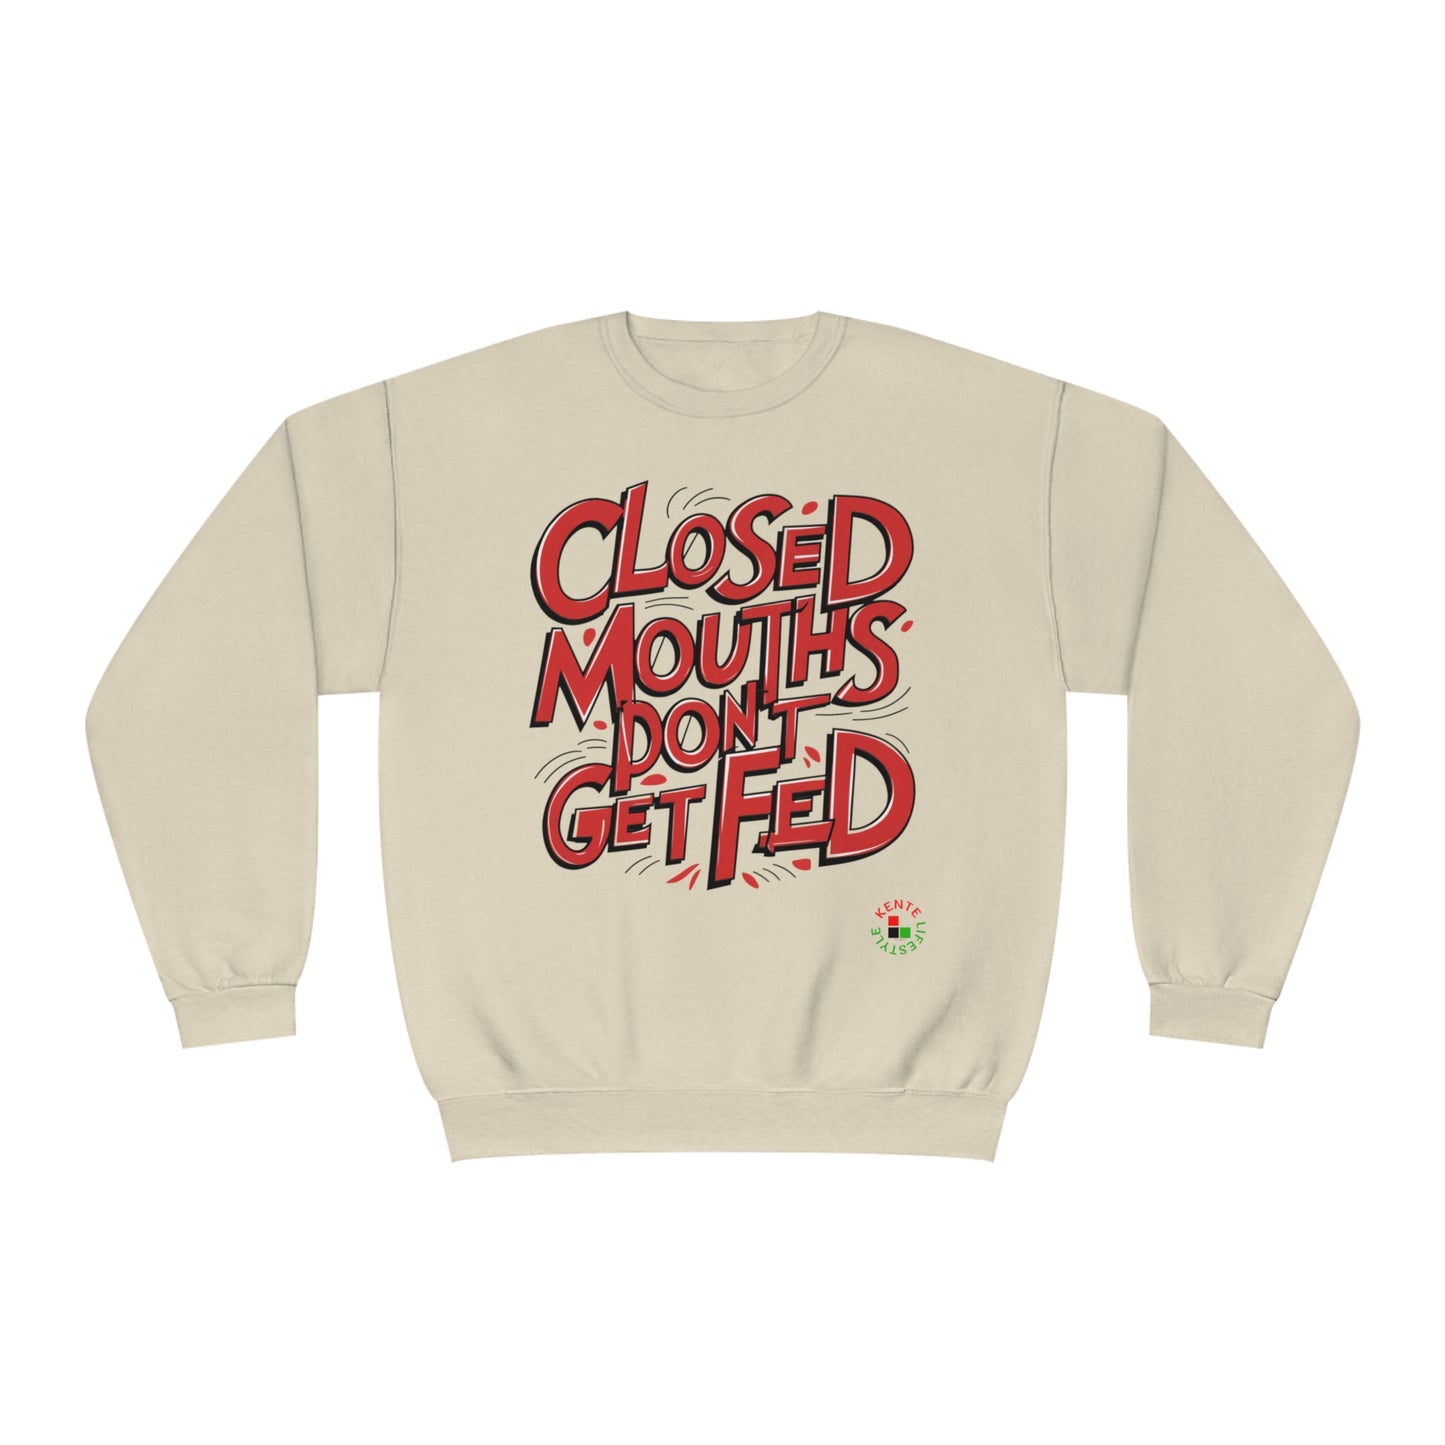 "Closed Mouths Don't Get Fed" - Sweatshirt